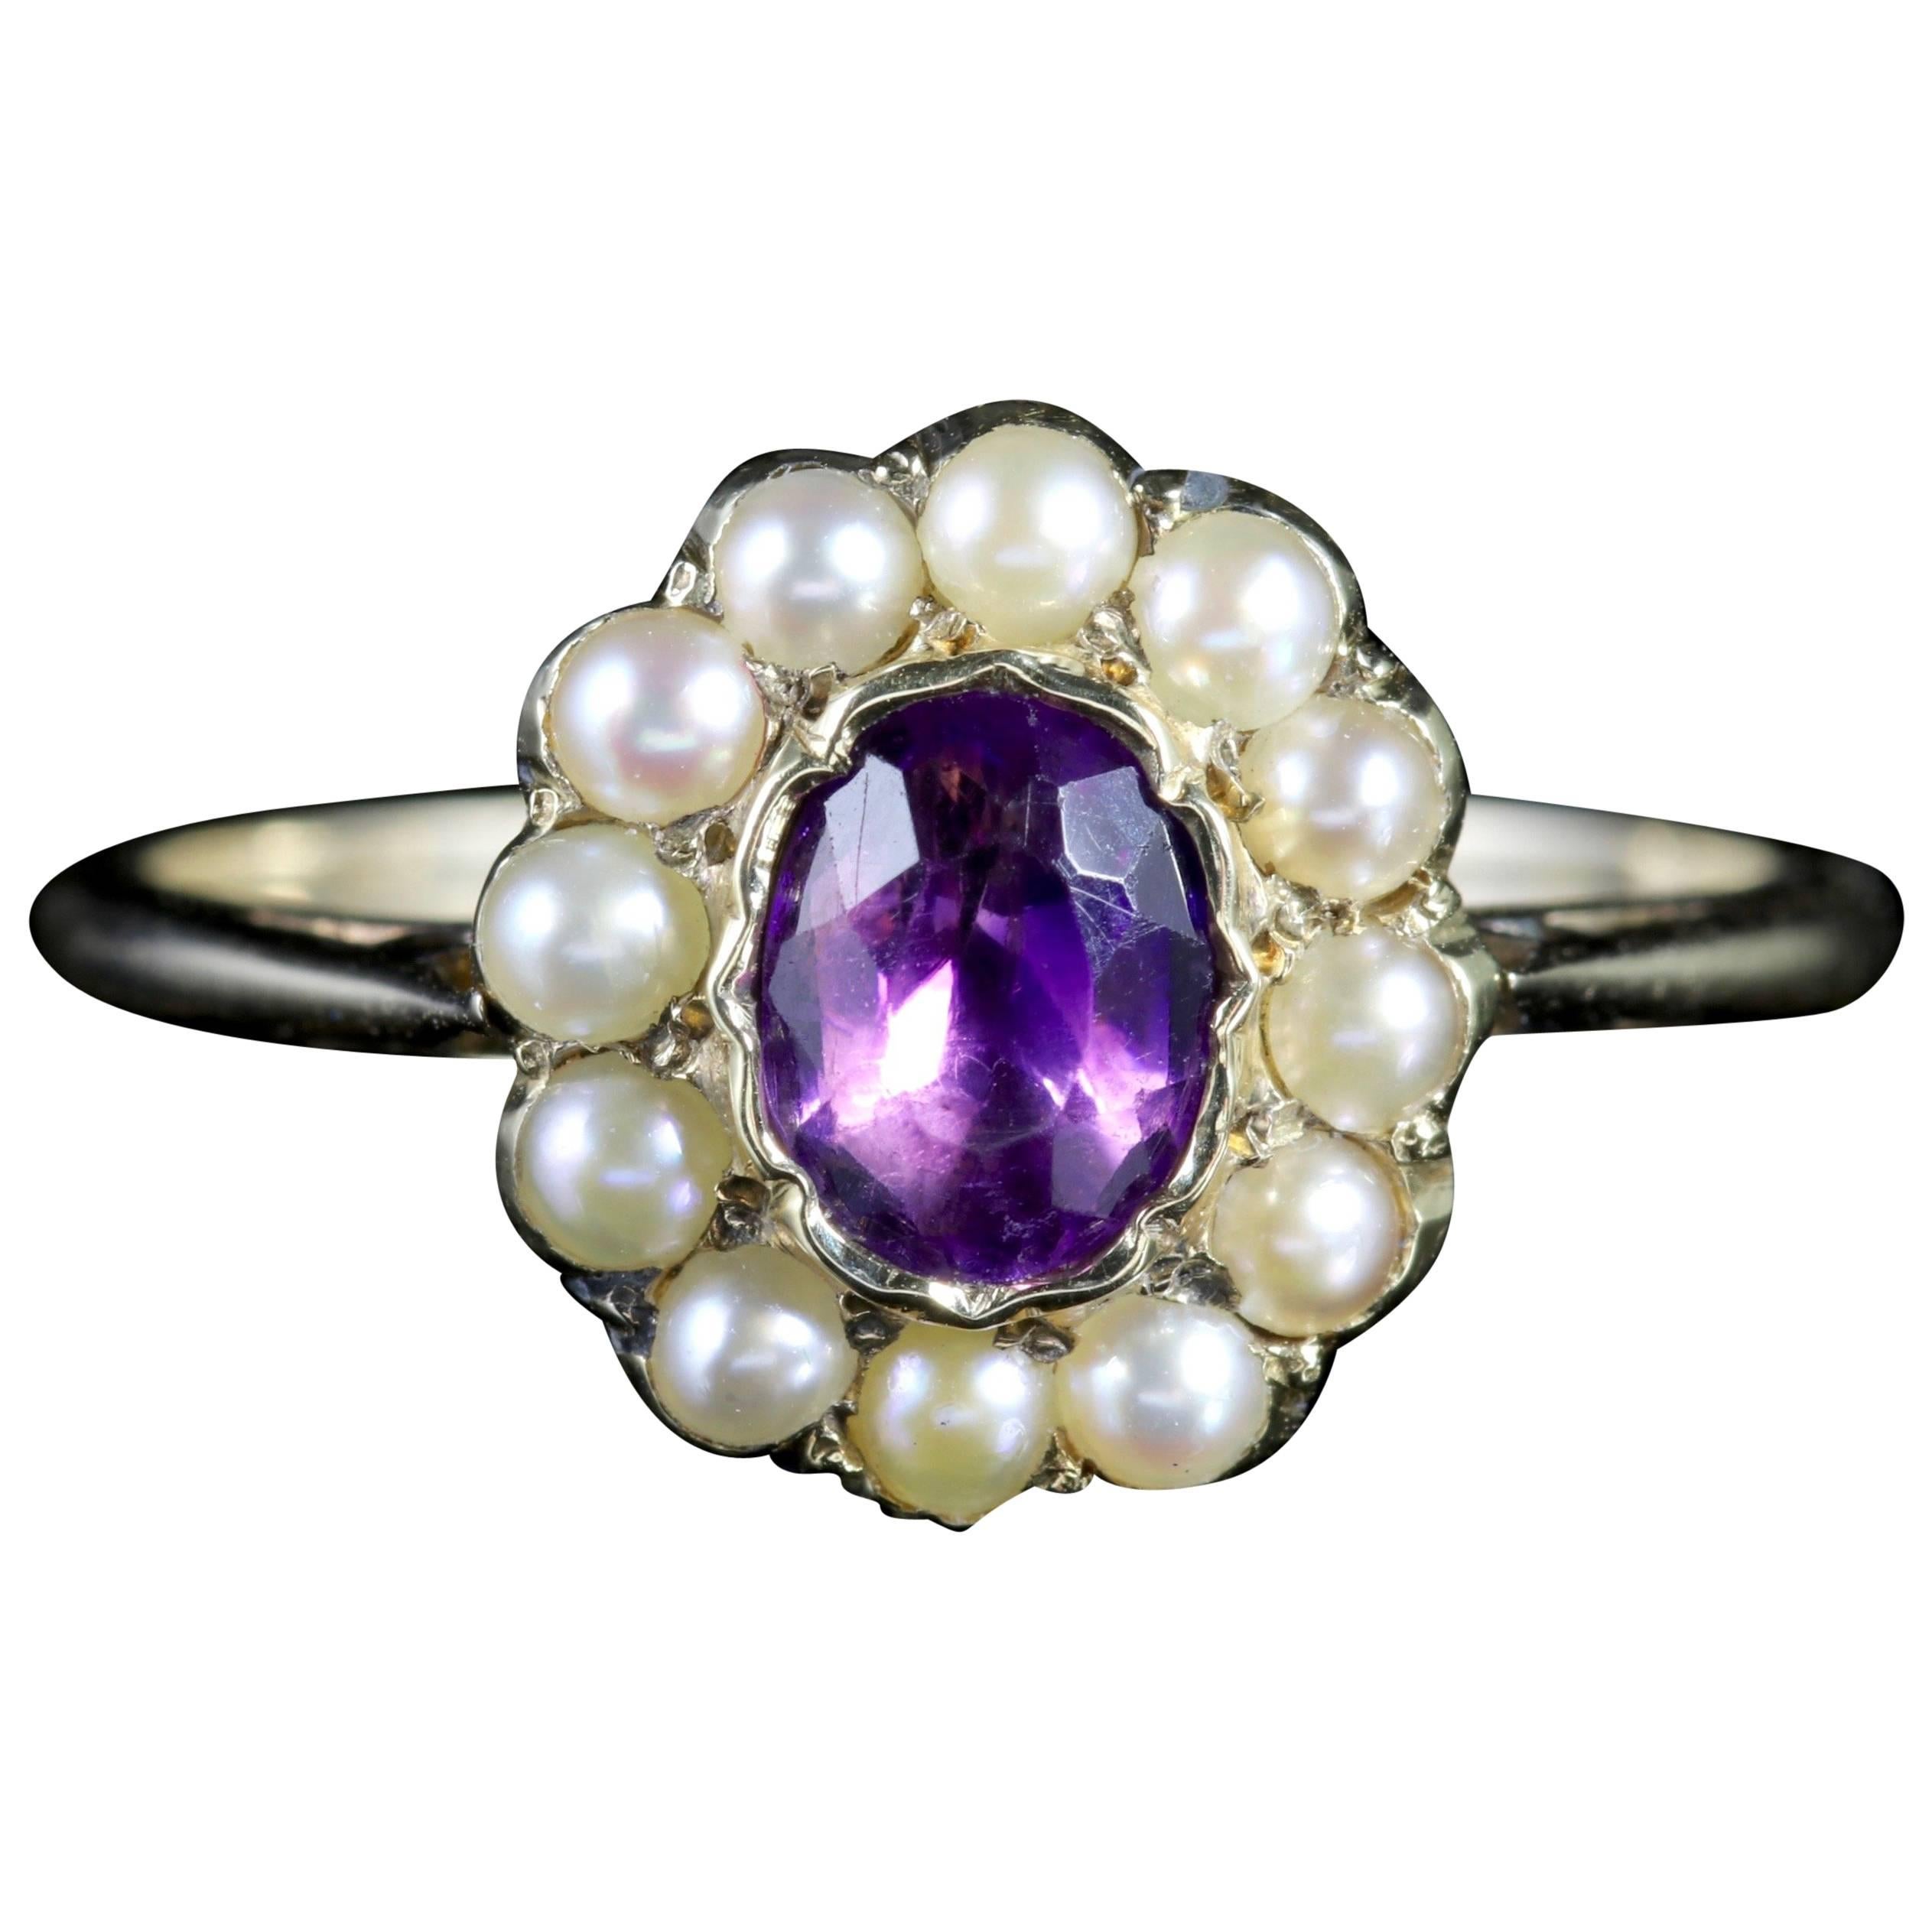 Antique Victorian Amethyst Pearl Cluster Ring 18ct Gold, circa 1900